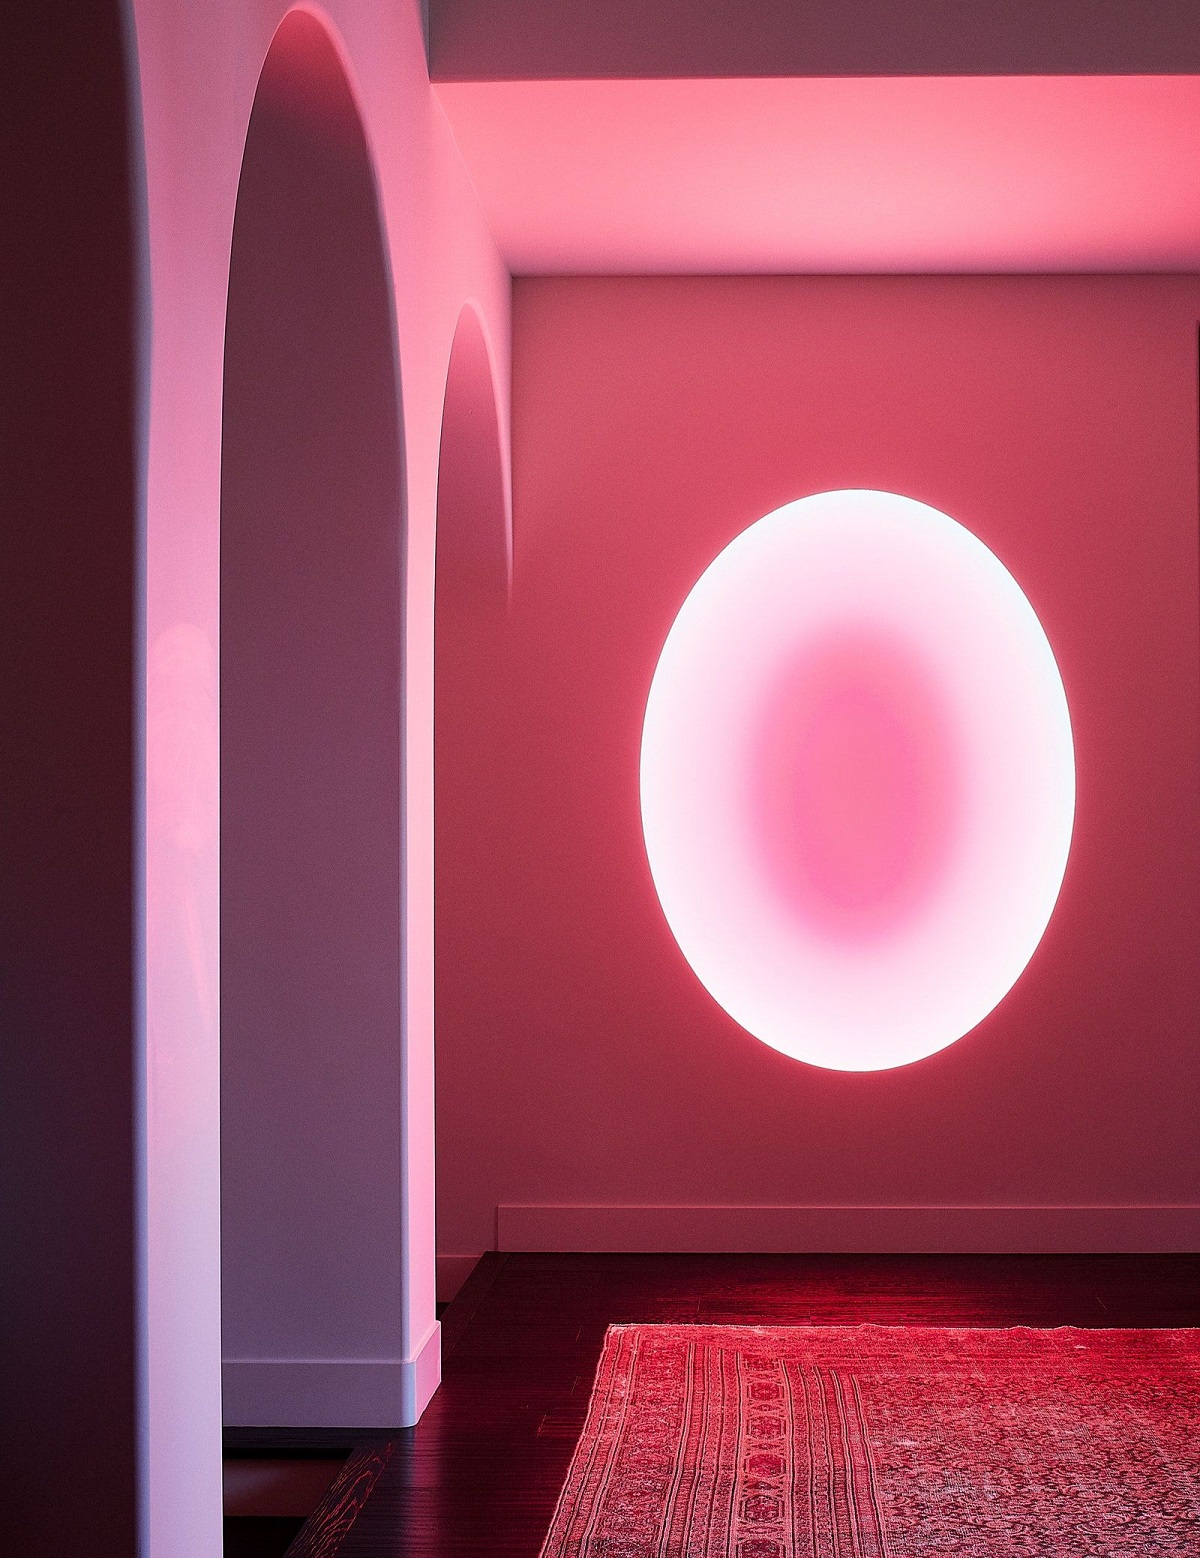 Kendall Jenner's Artwork By James Turrell